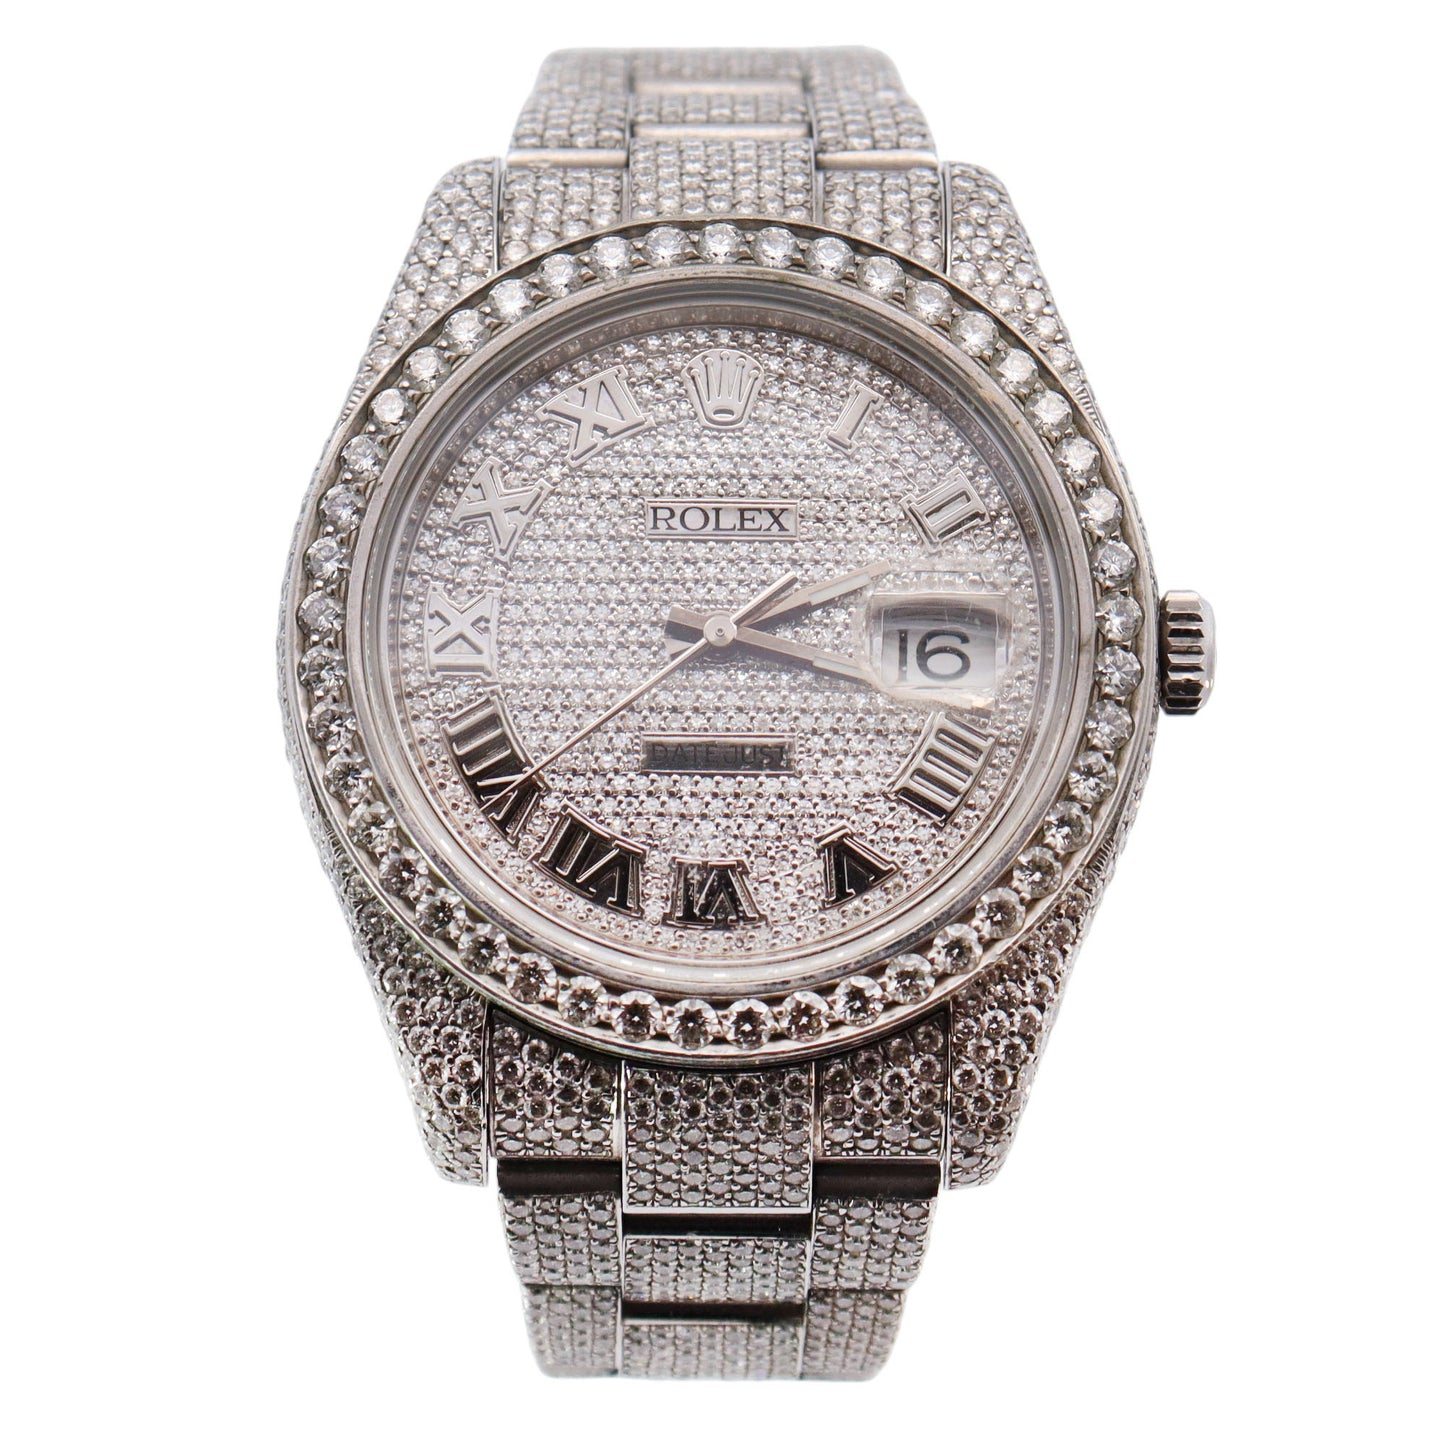 Rolex Datejust ICED OUT Stainless Steel 41mm Custom Pave Roman Dial Watch Reference# 116300 - Happy Jewelers Fine Jewelry Lifetime Warranty